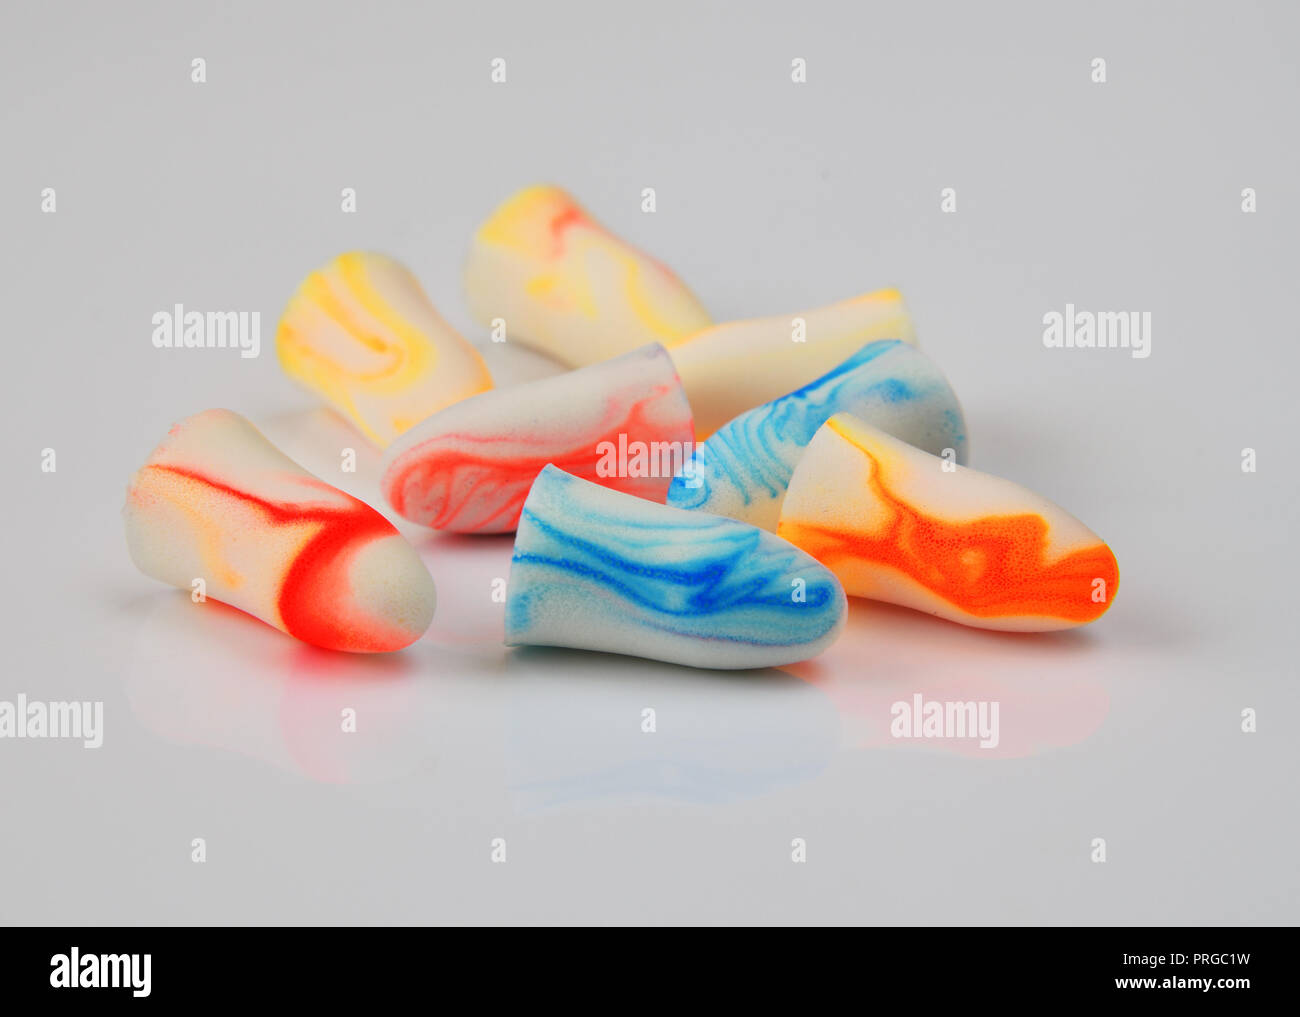 several earplugs on a white background Stock Photo